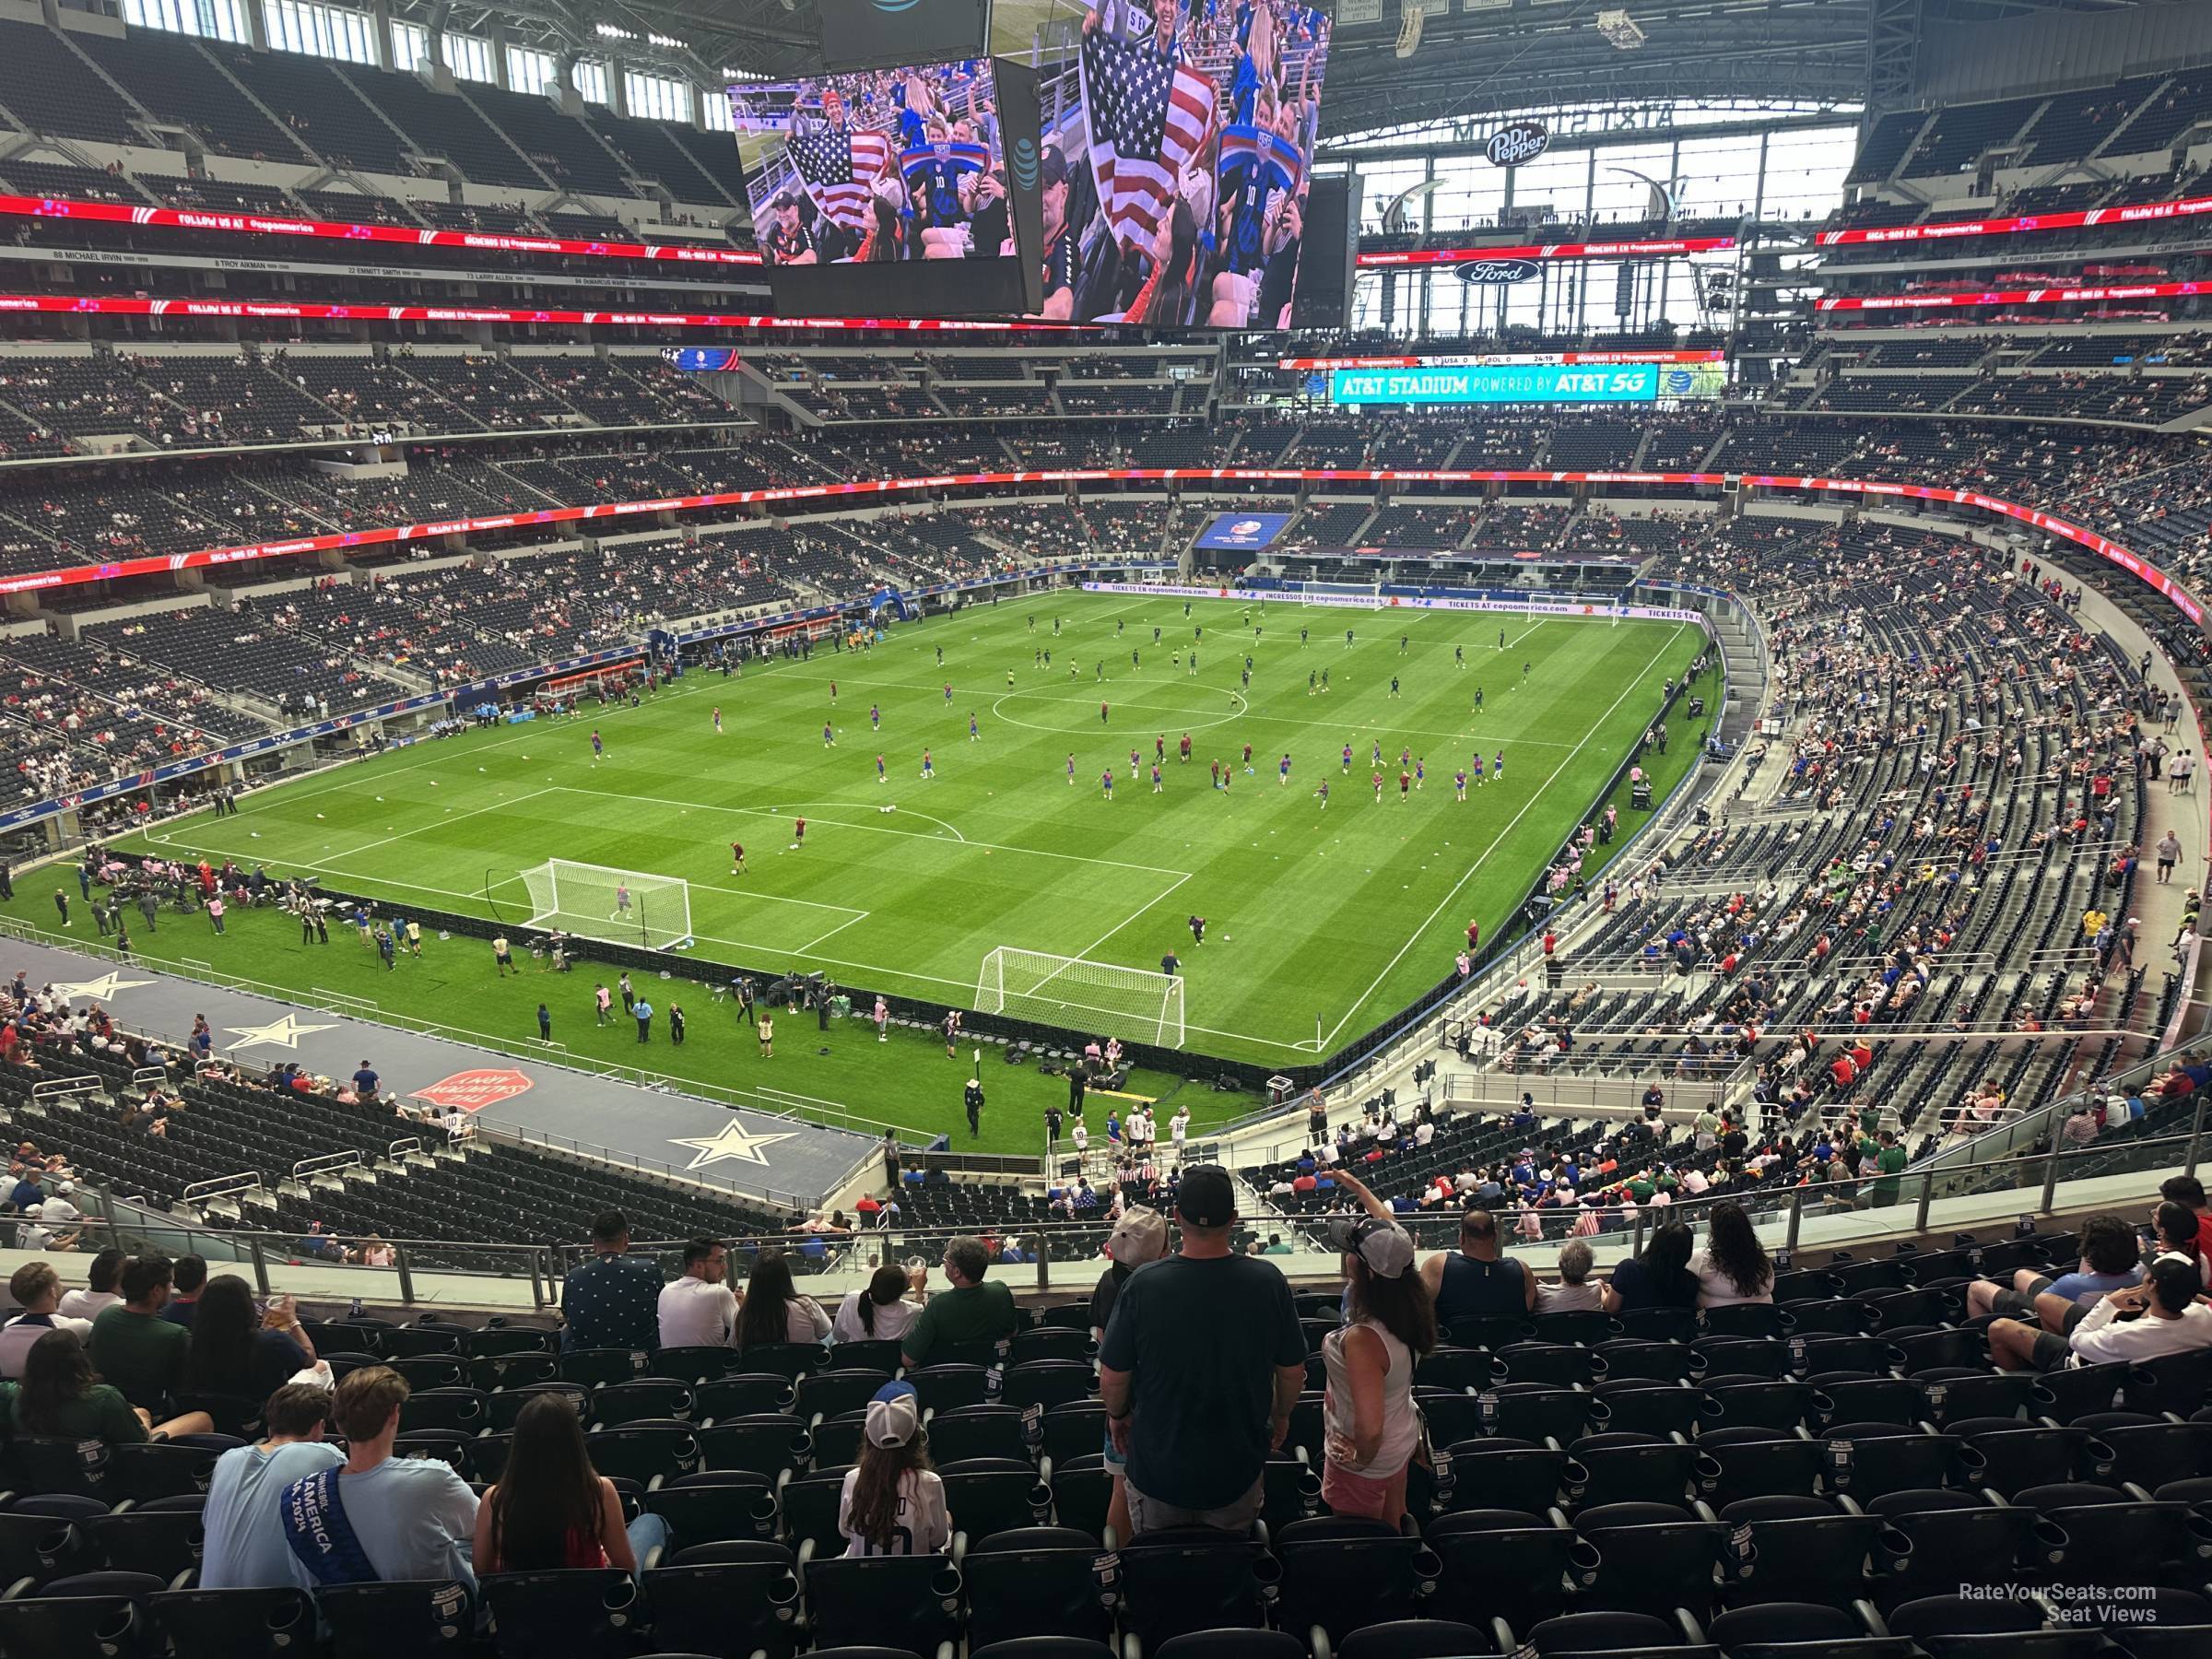 section 319, row 12 seat view  for soccer - at&t stadium (cowboys stadium)